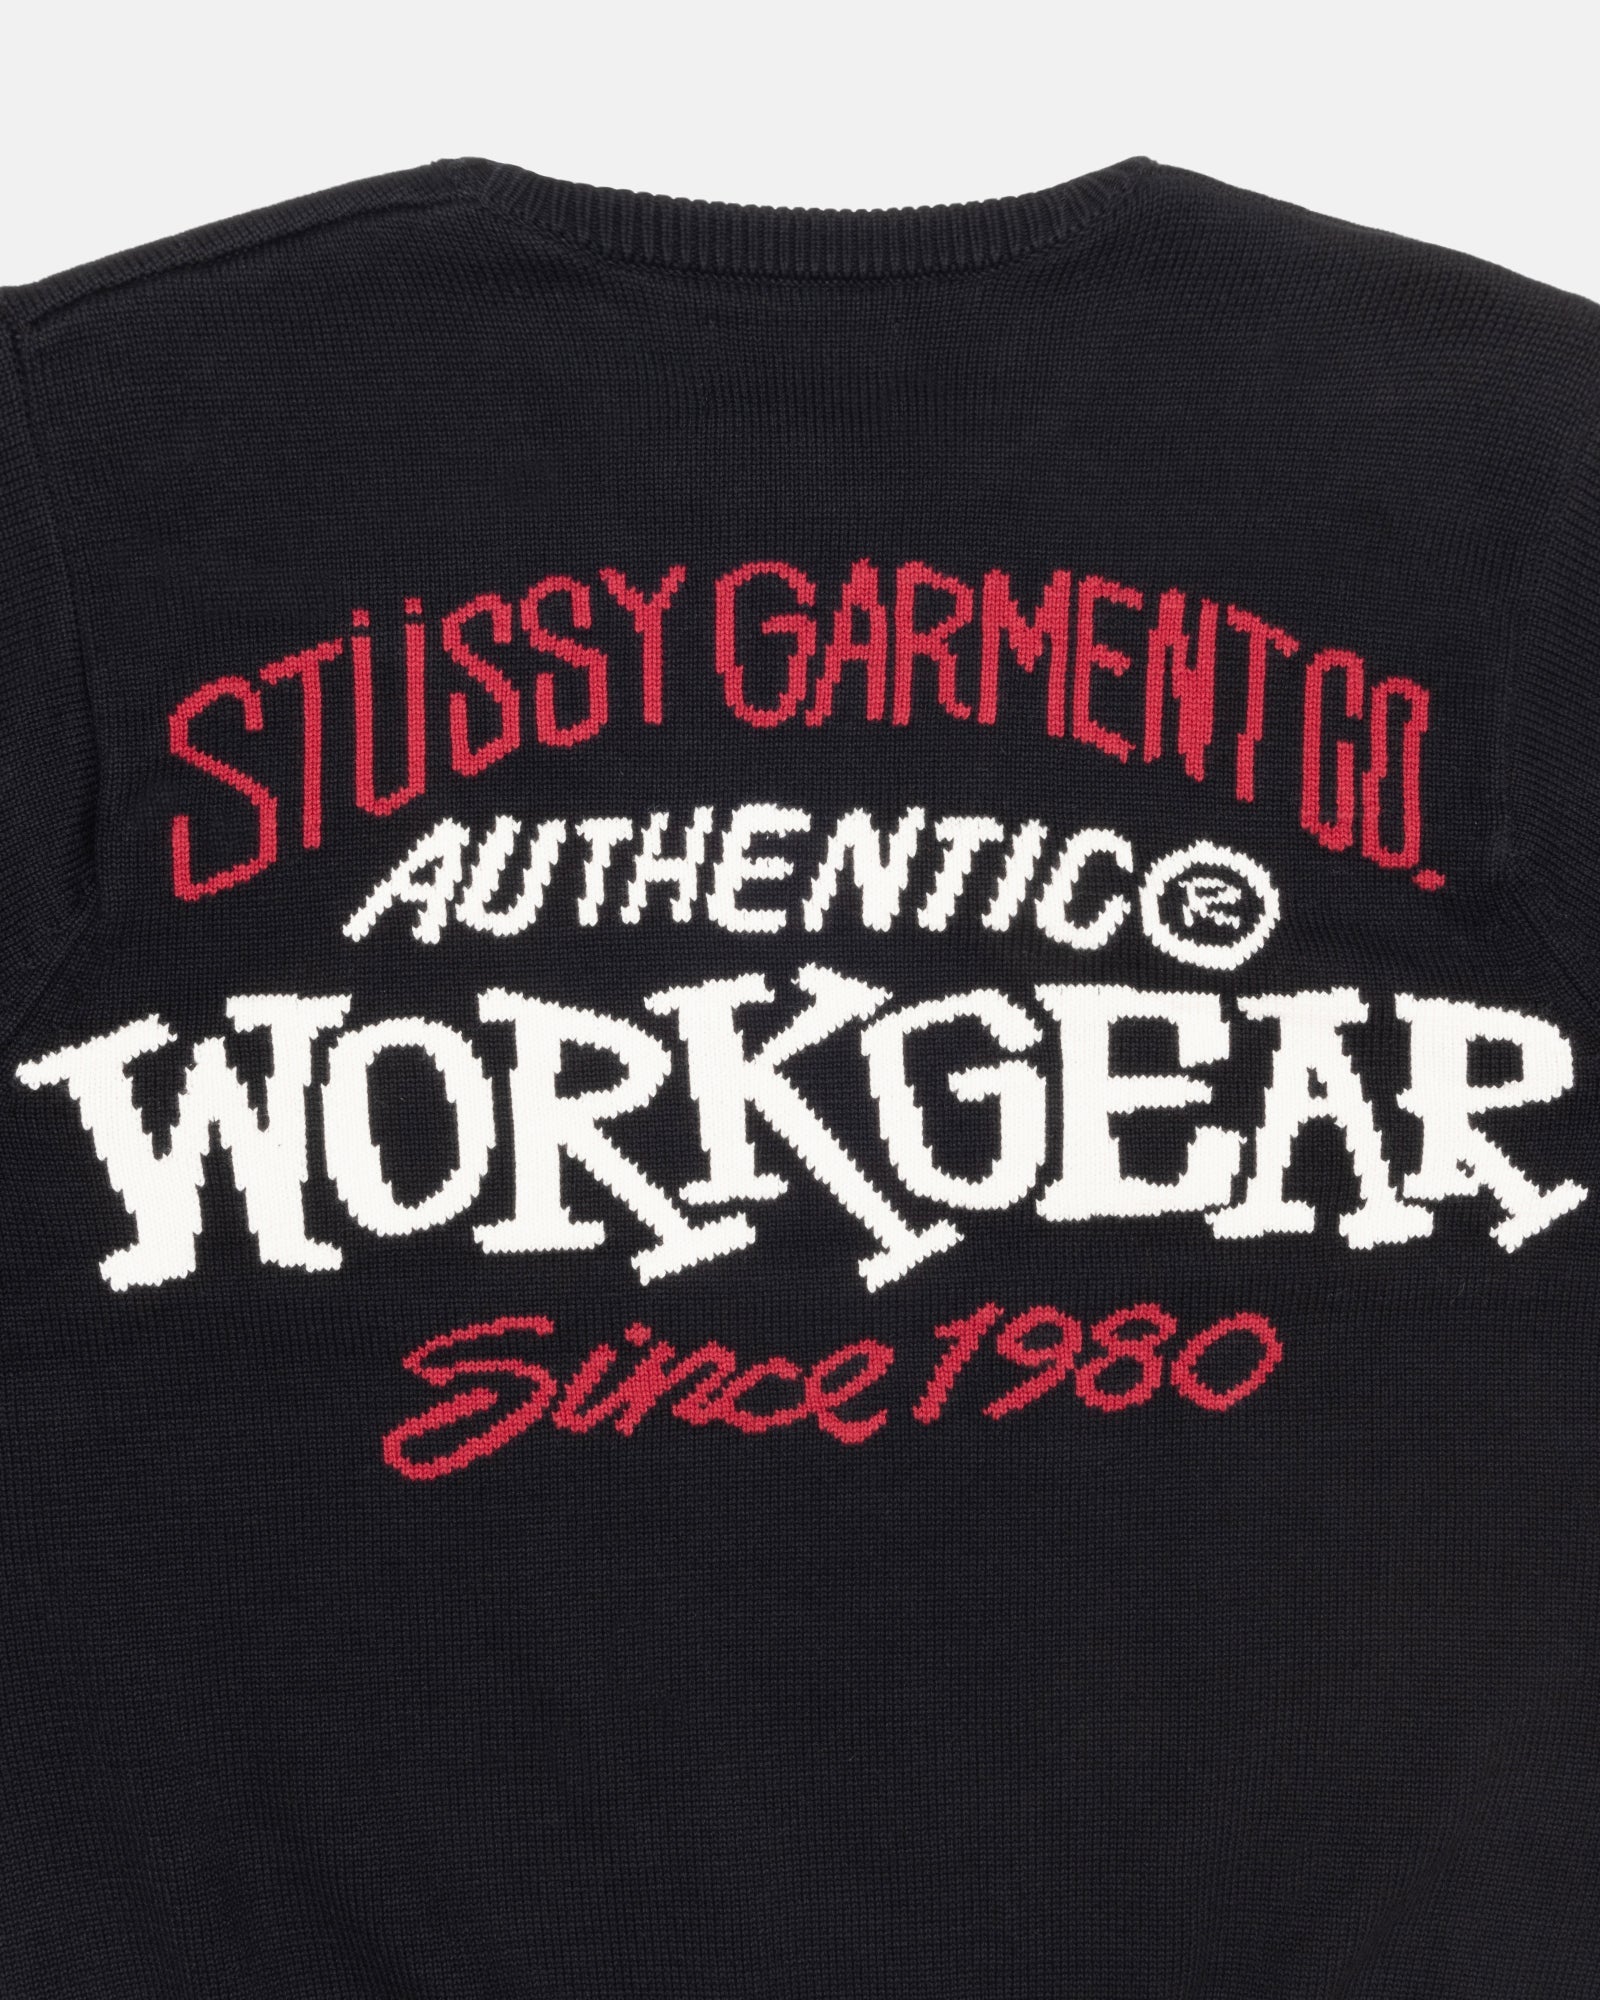 STUSSY - AUTHENTIC WORKGEAR SWEATER